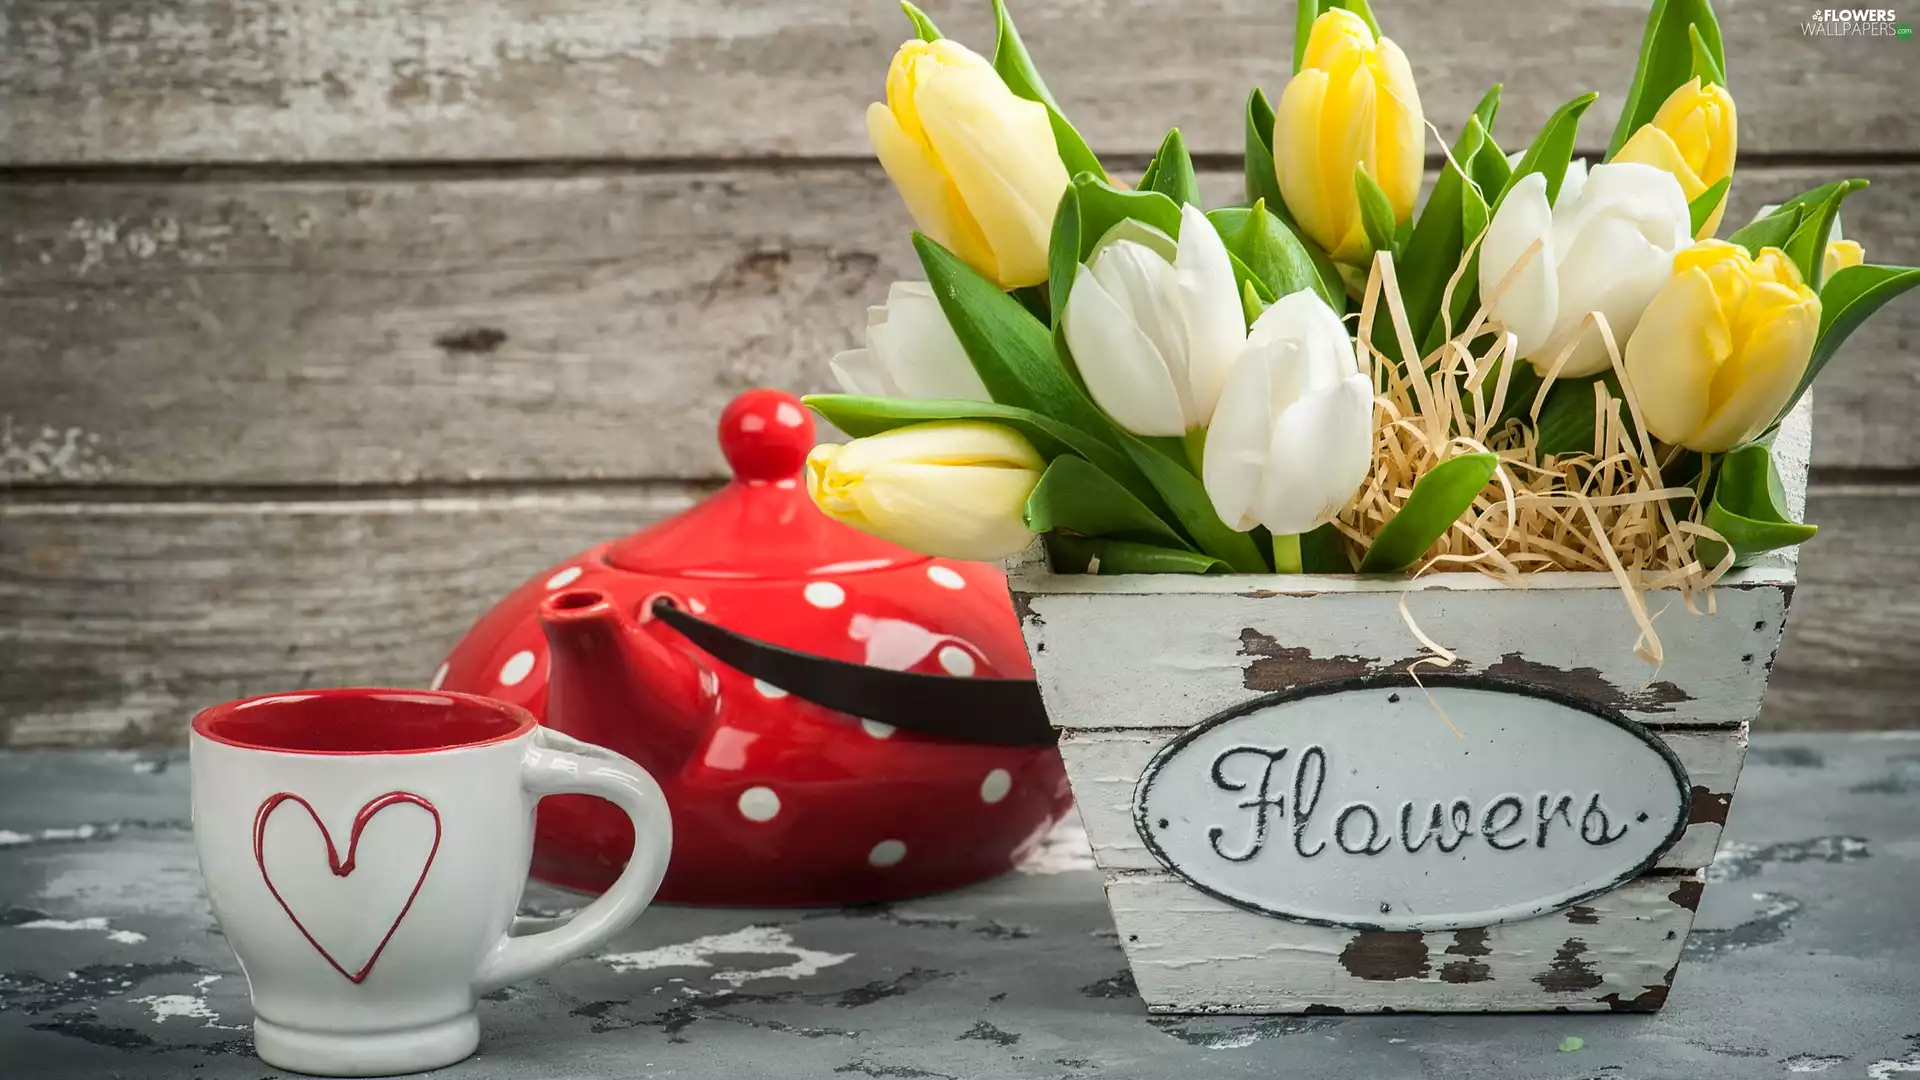 kettle, Cup, Wooden, pot, Tulips